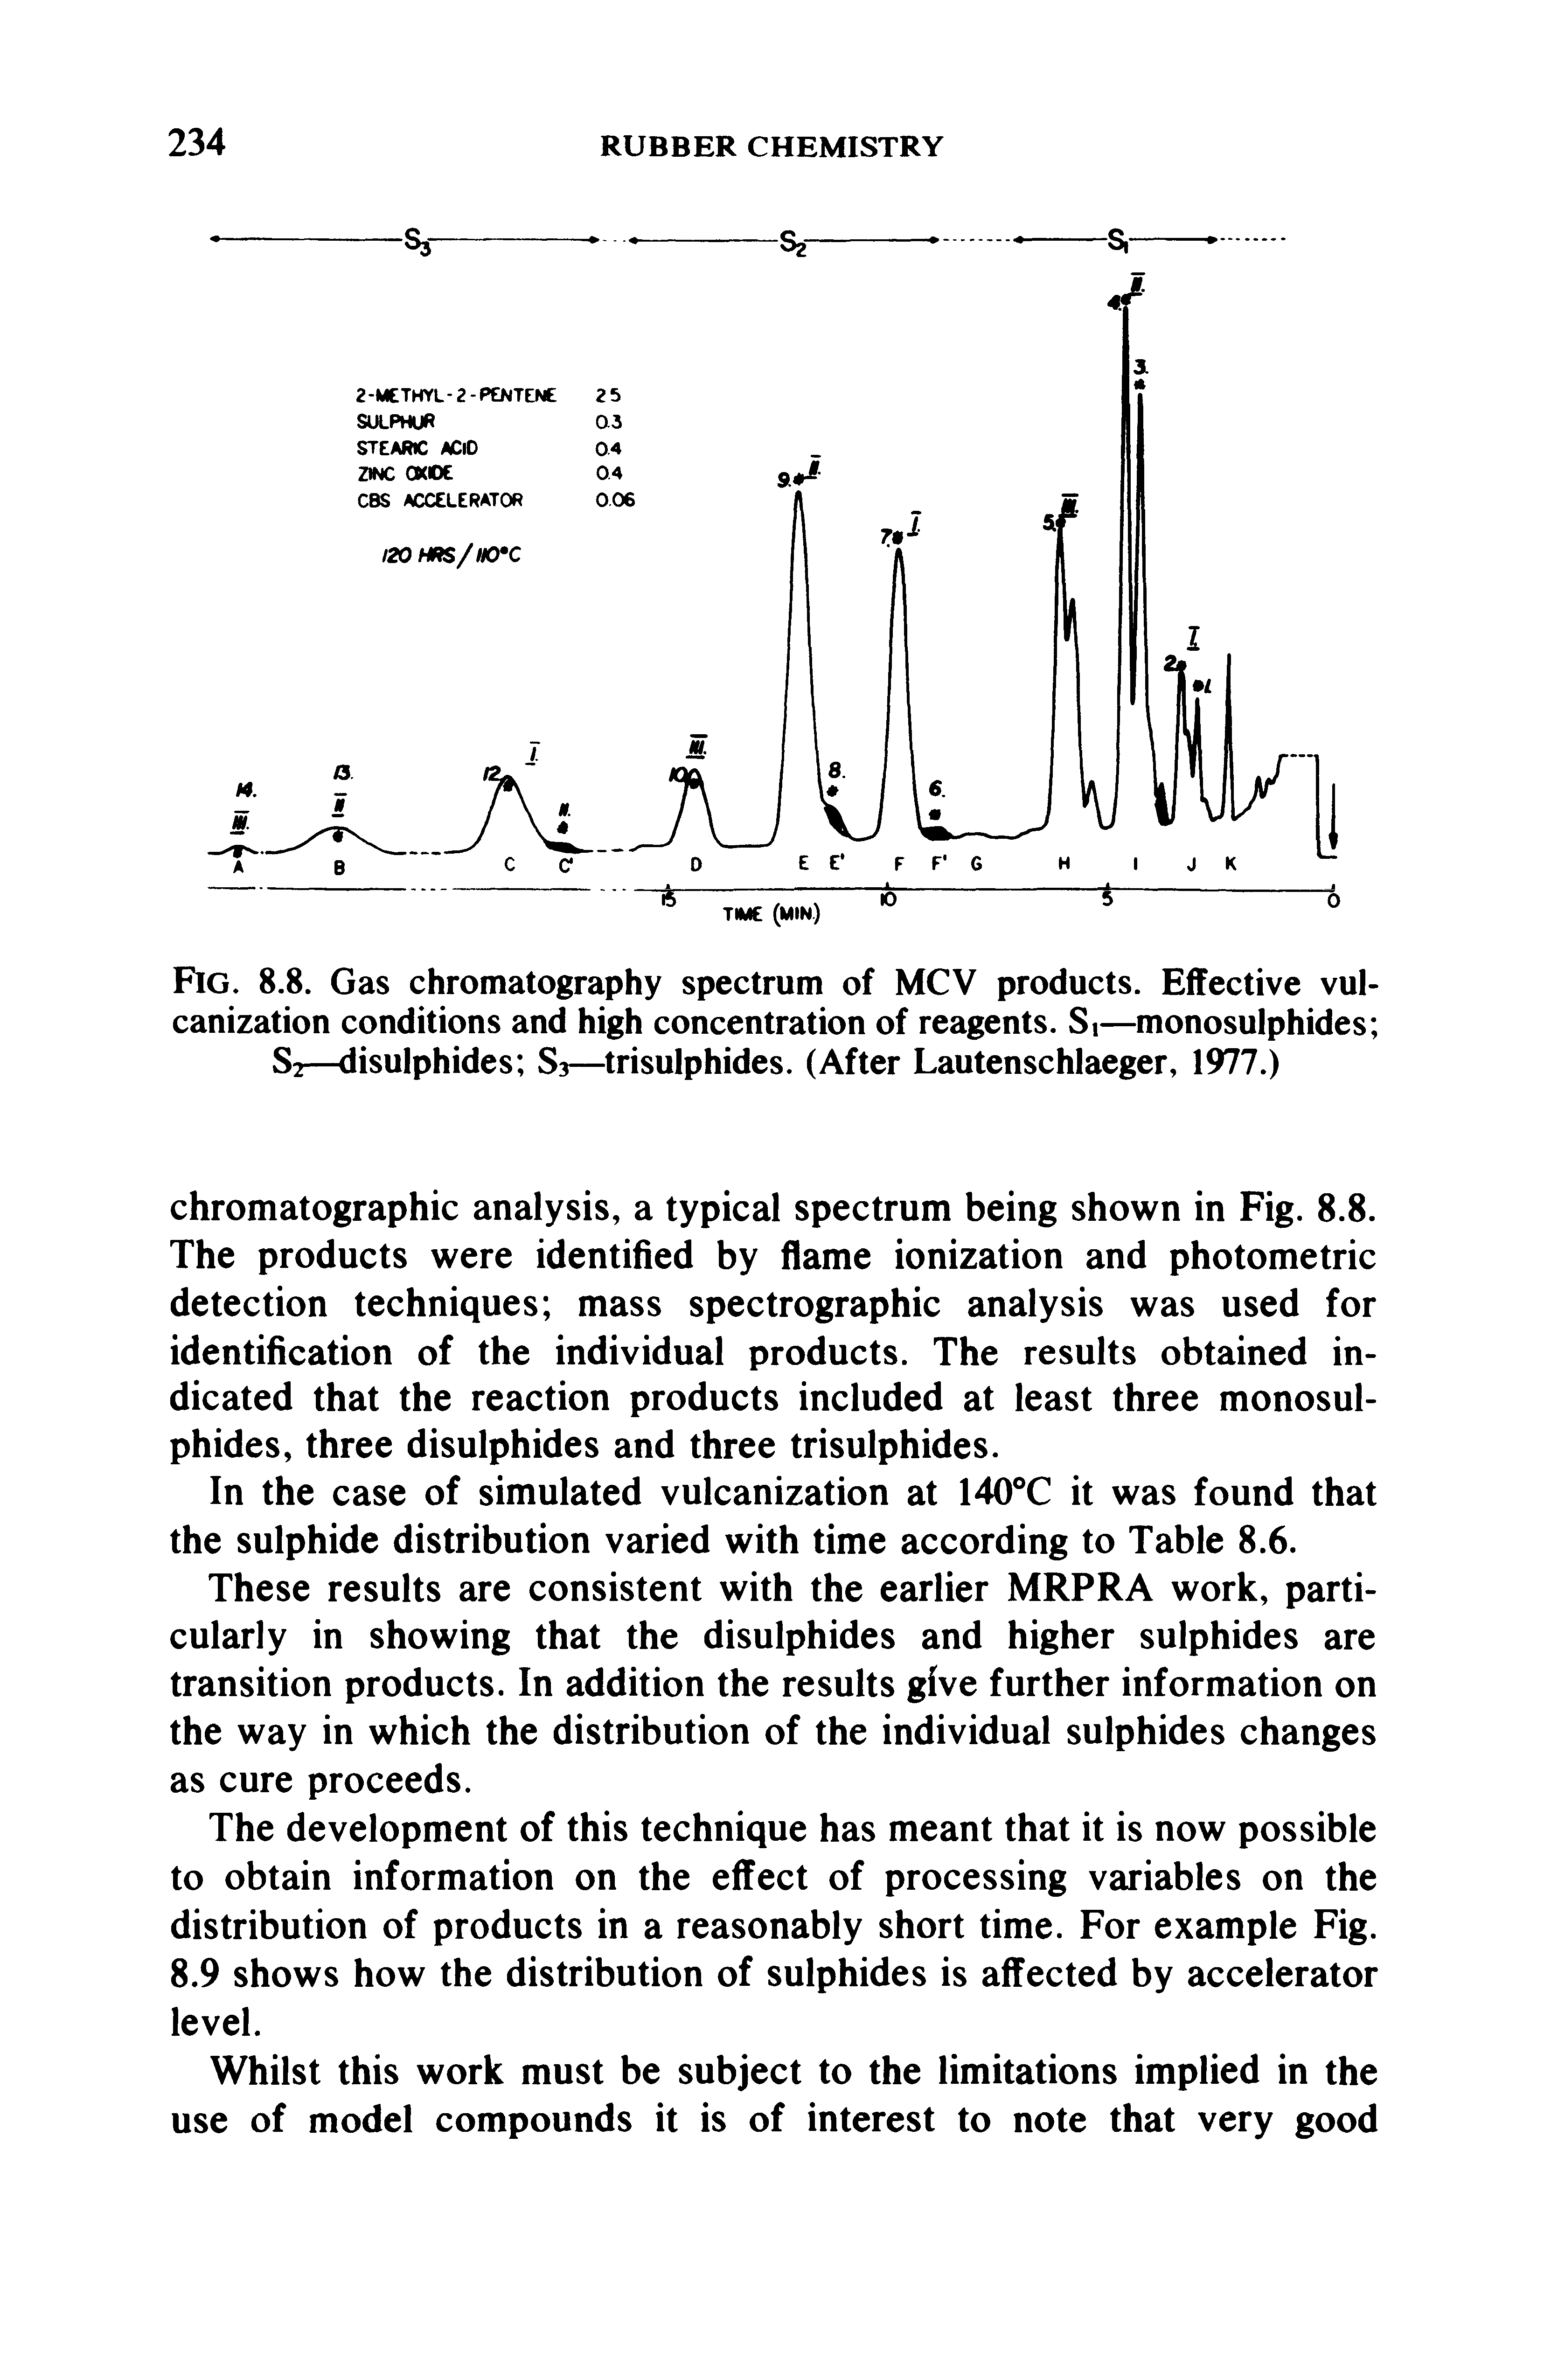 Fig. 8.8. Gas chromatography spectrum of MCV products. Effective vulcanization conditions and high concentration of reagents. Si—monosulphides S2—disulphides S3— trisulphides. (After Lautenschlaeger, 1977.)...